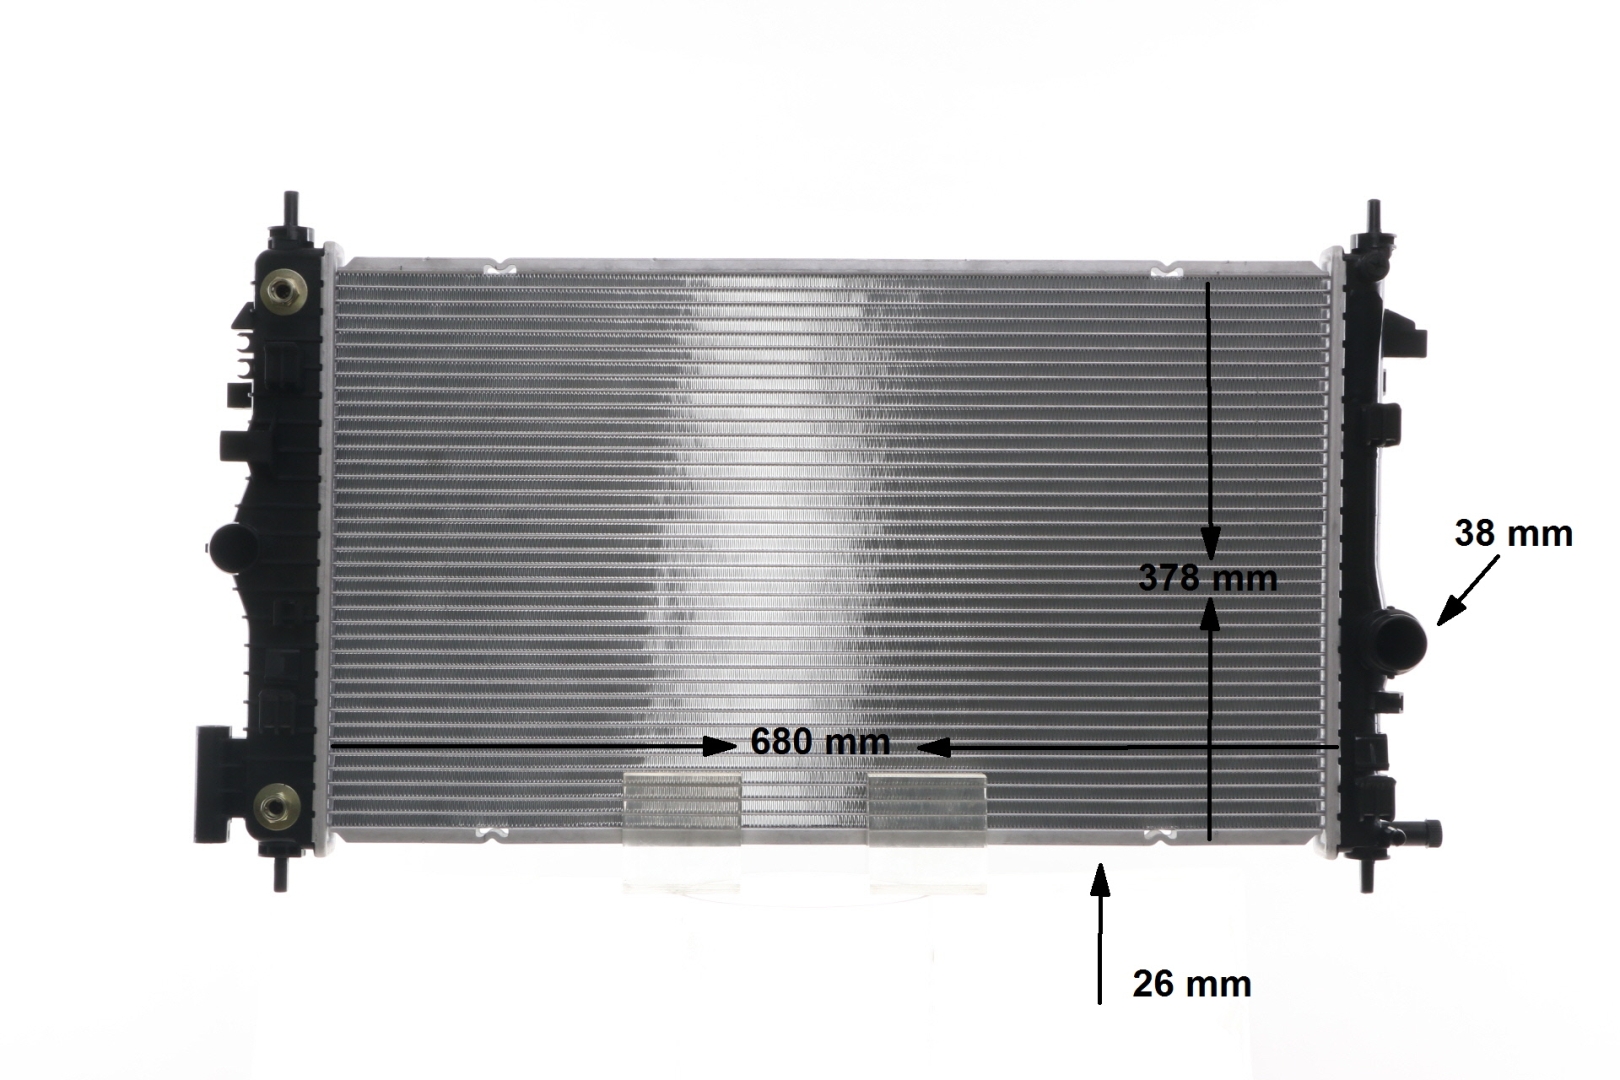 MAHLE ORIGINAL CR 1103 000S Engine radiator for vehicles with air conditioning, 680 x 378 x 27 mm, Automatic Transmission, Brazed cooling fins